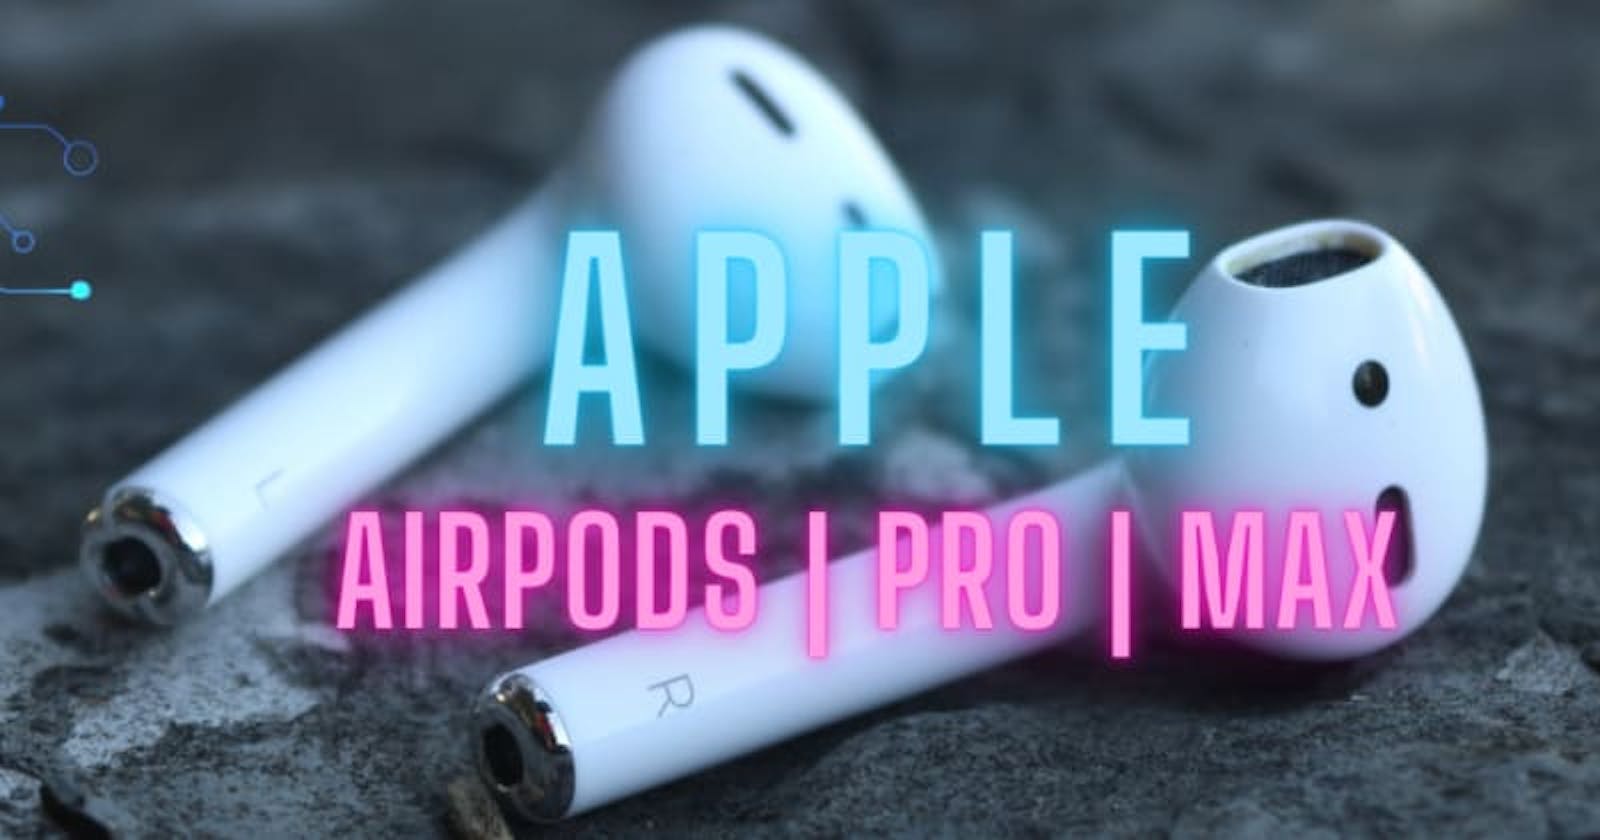 Solving Apple AirPods Connectivity Issues with Windows 10/11